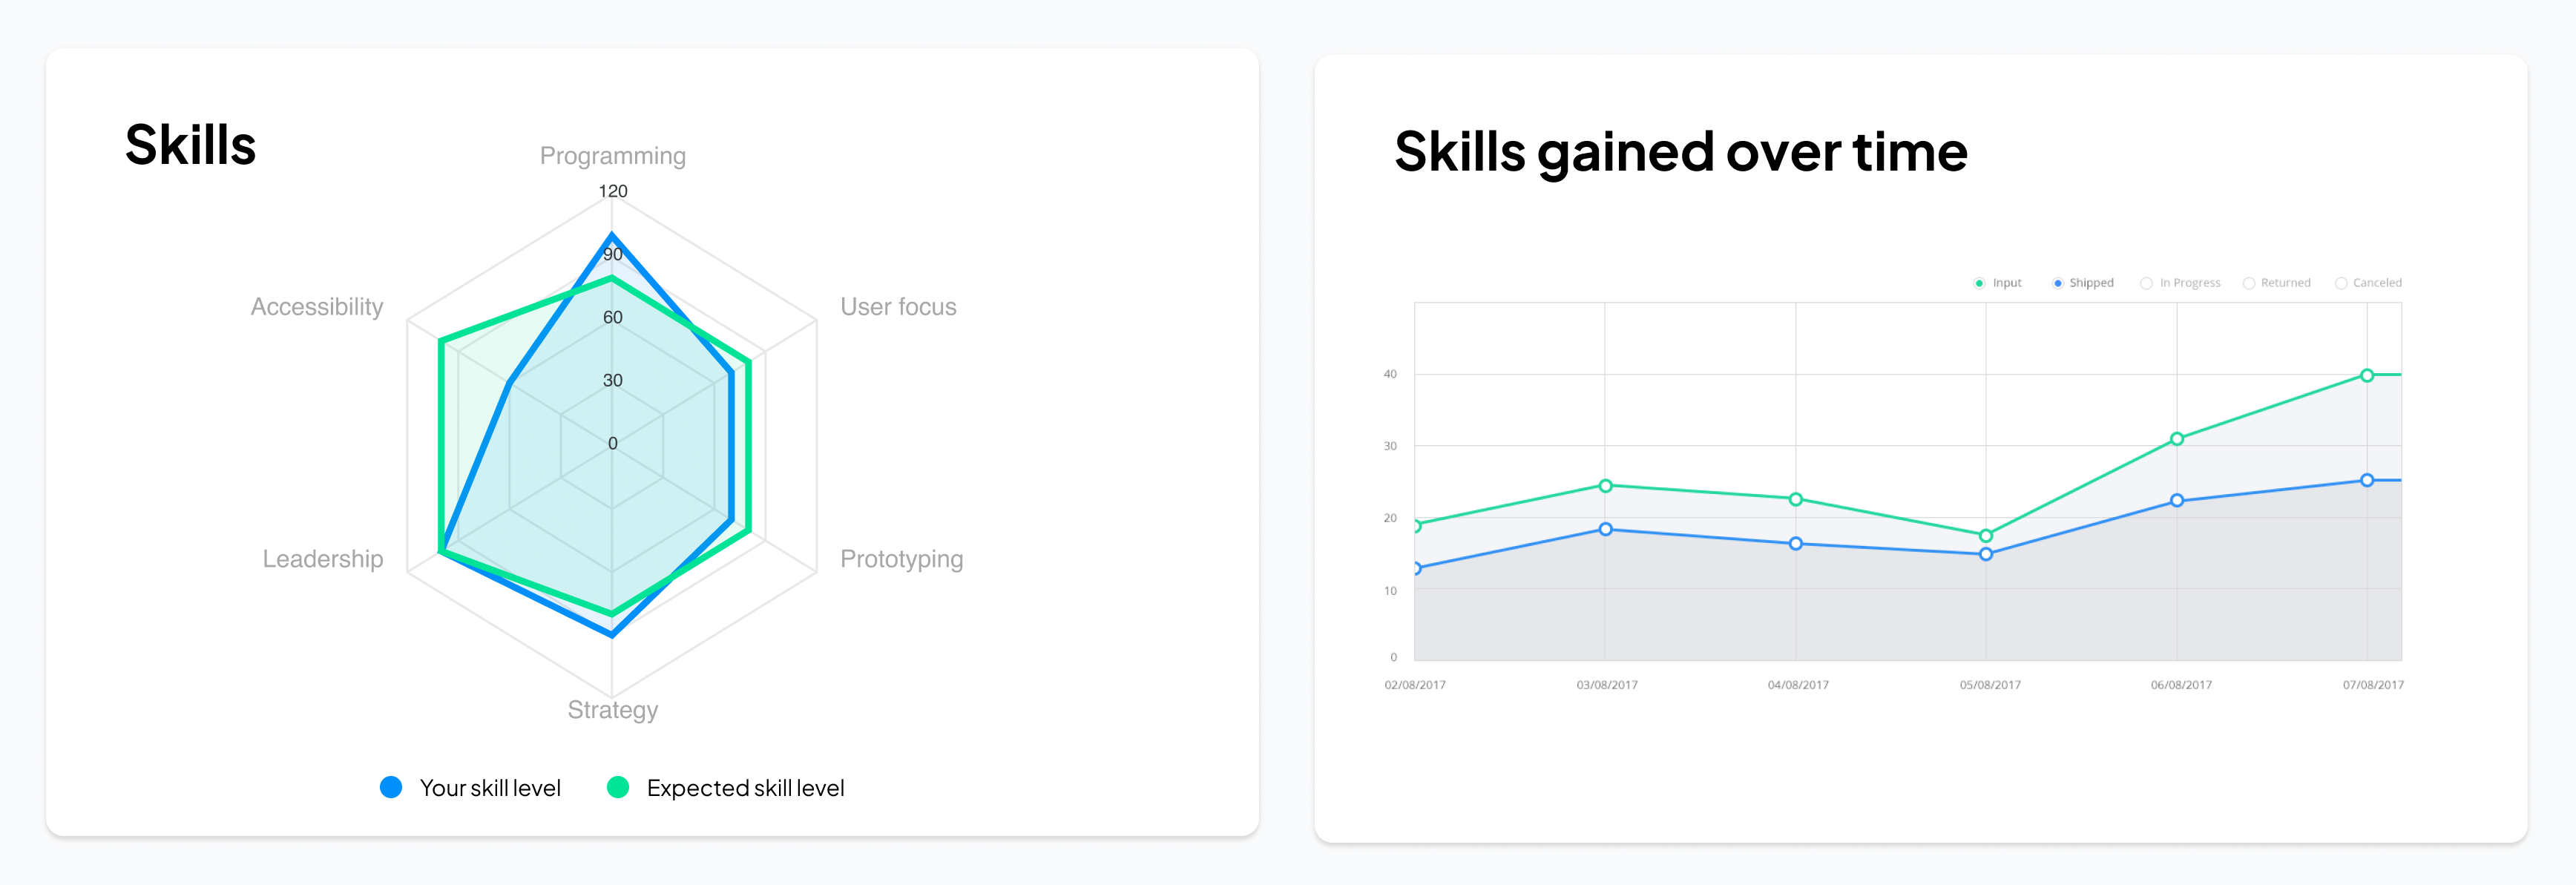 Two diagrams, one showing your skill level against expected skill level and another showing skills gained over time